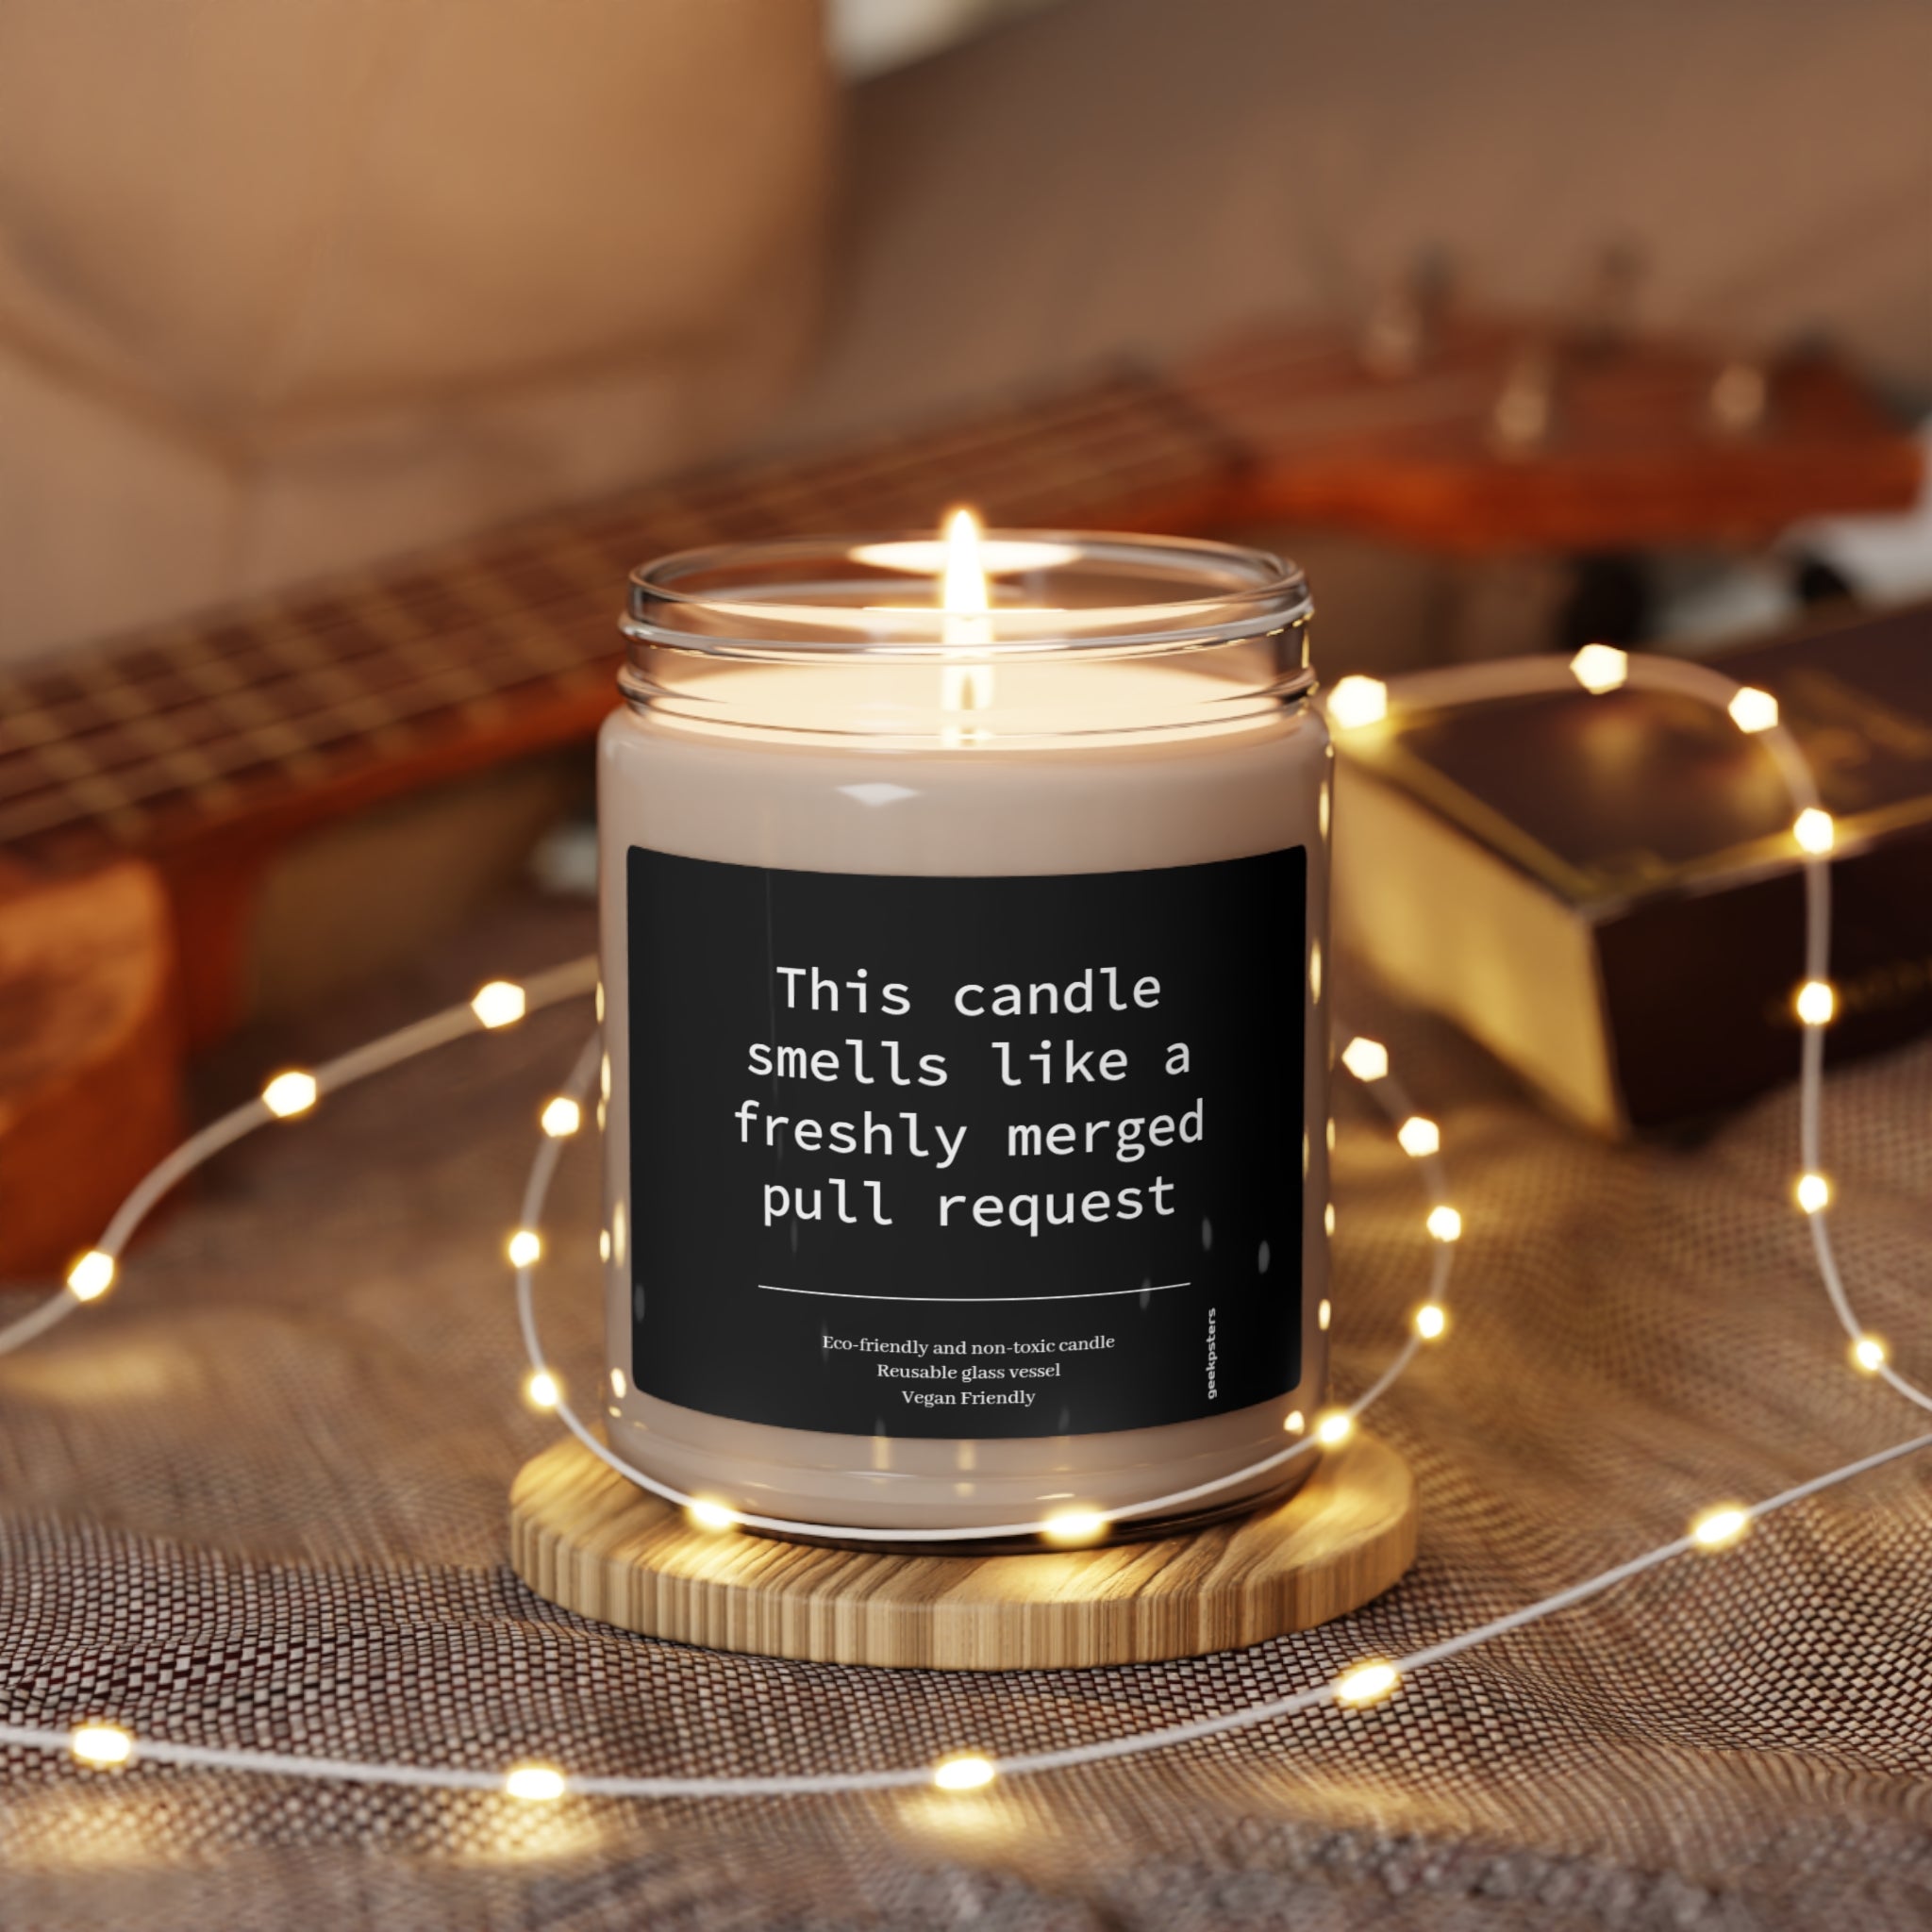 A scented candle with the humorous label "This Candle Smells Like a Freshly Merged Pull Request," crafted from a natural soy wax blend, displayed among soft lights and a cozy ambiance.